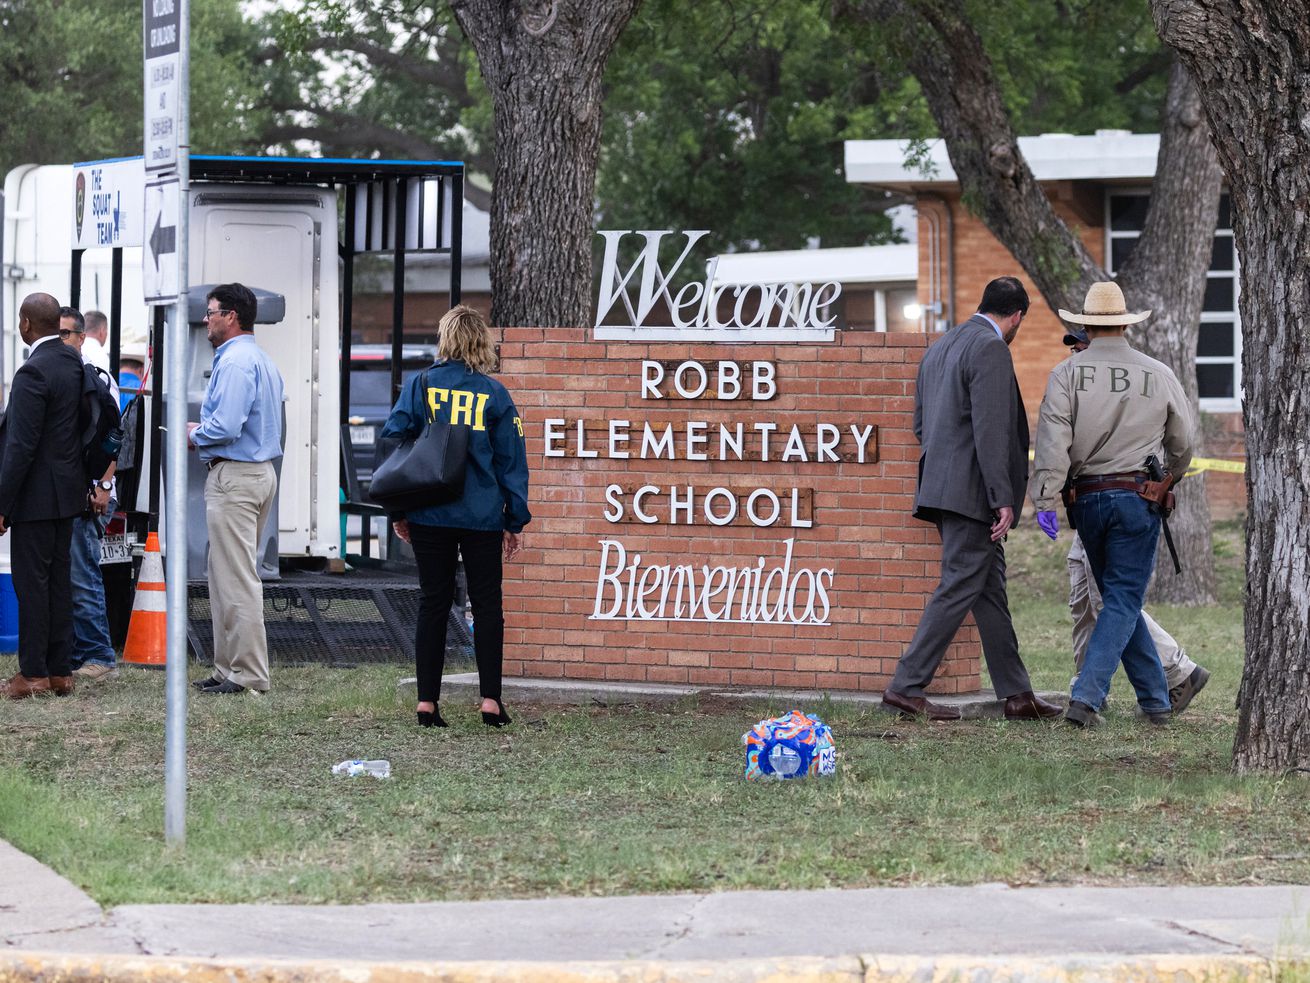 What we know about the Uvalde elementary school massacre